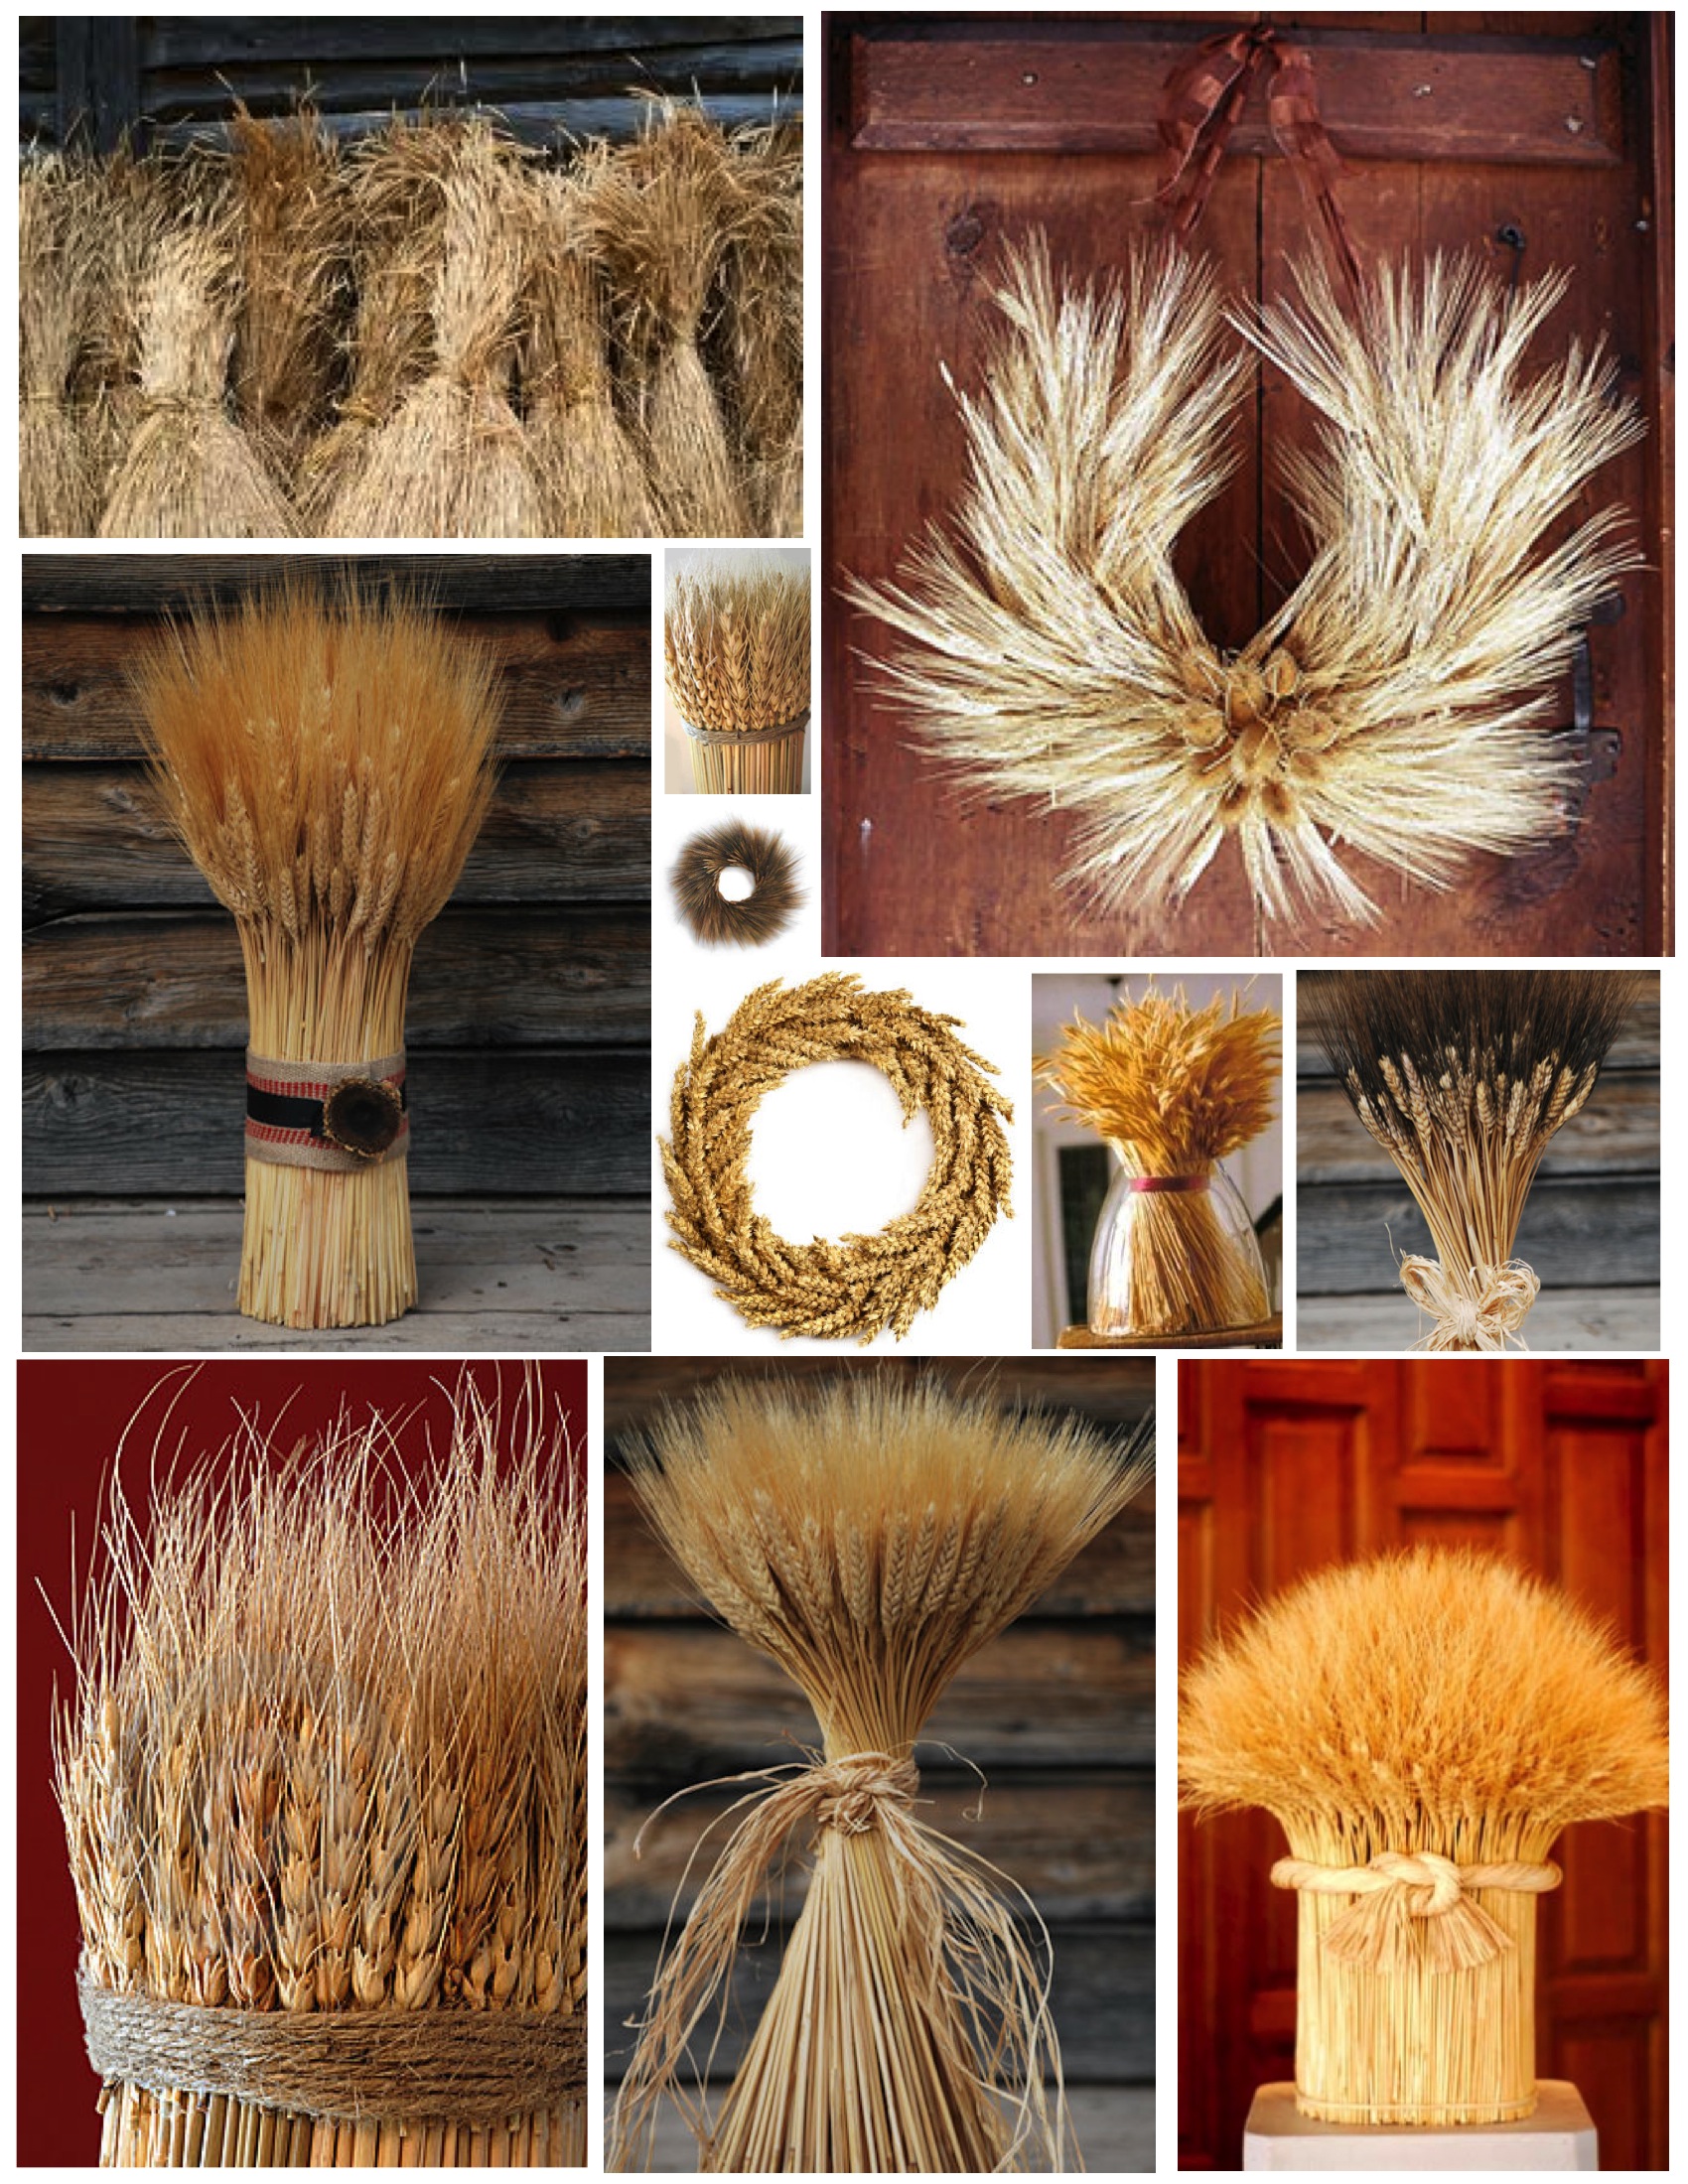 Natural Appeal A House Bounty Wheat: Interior The | Of Style Within Appeal Of The